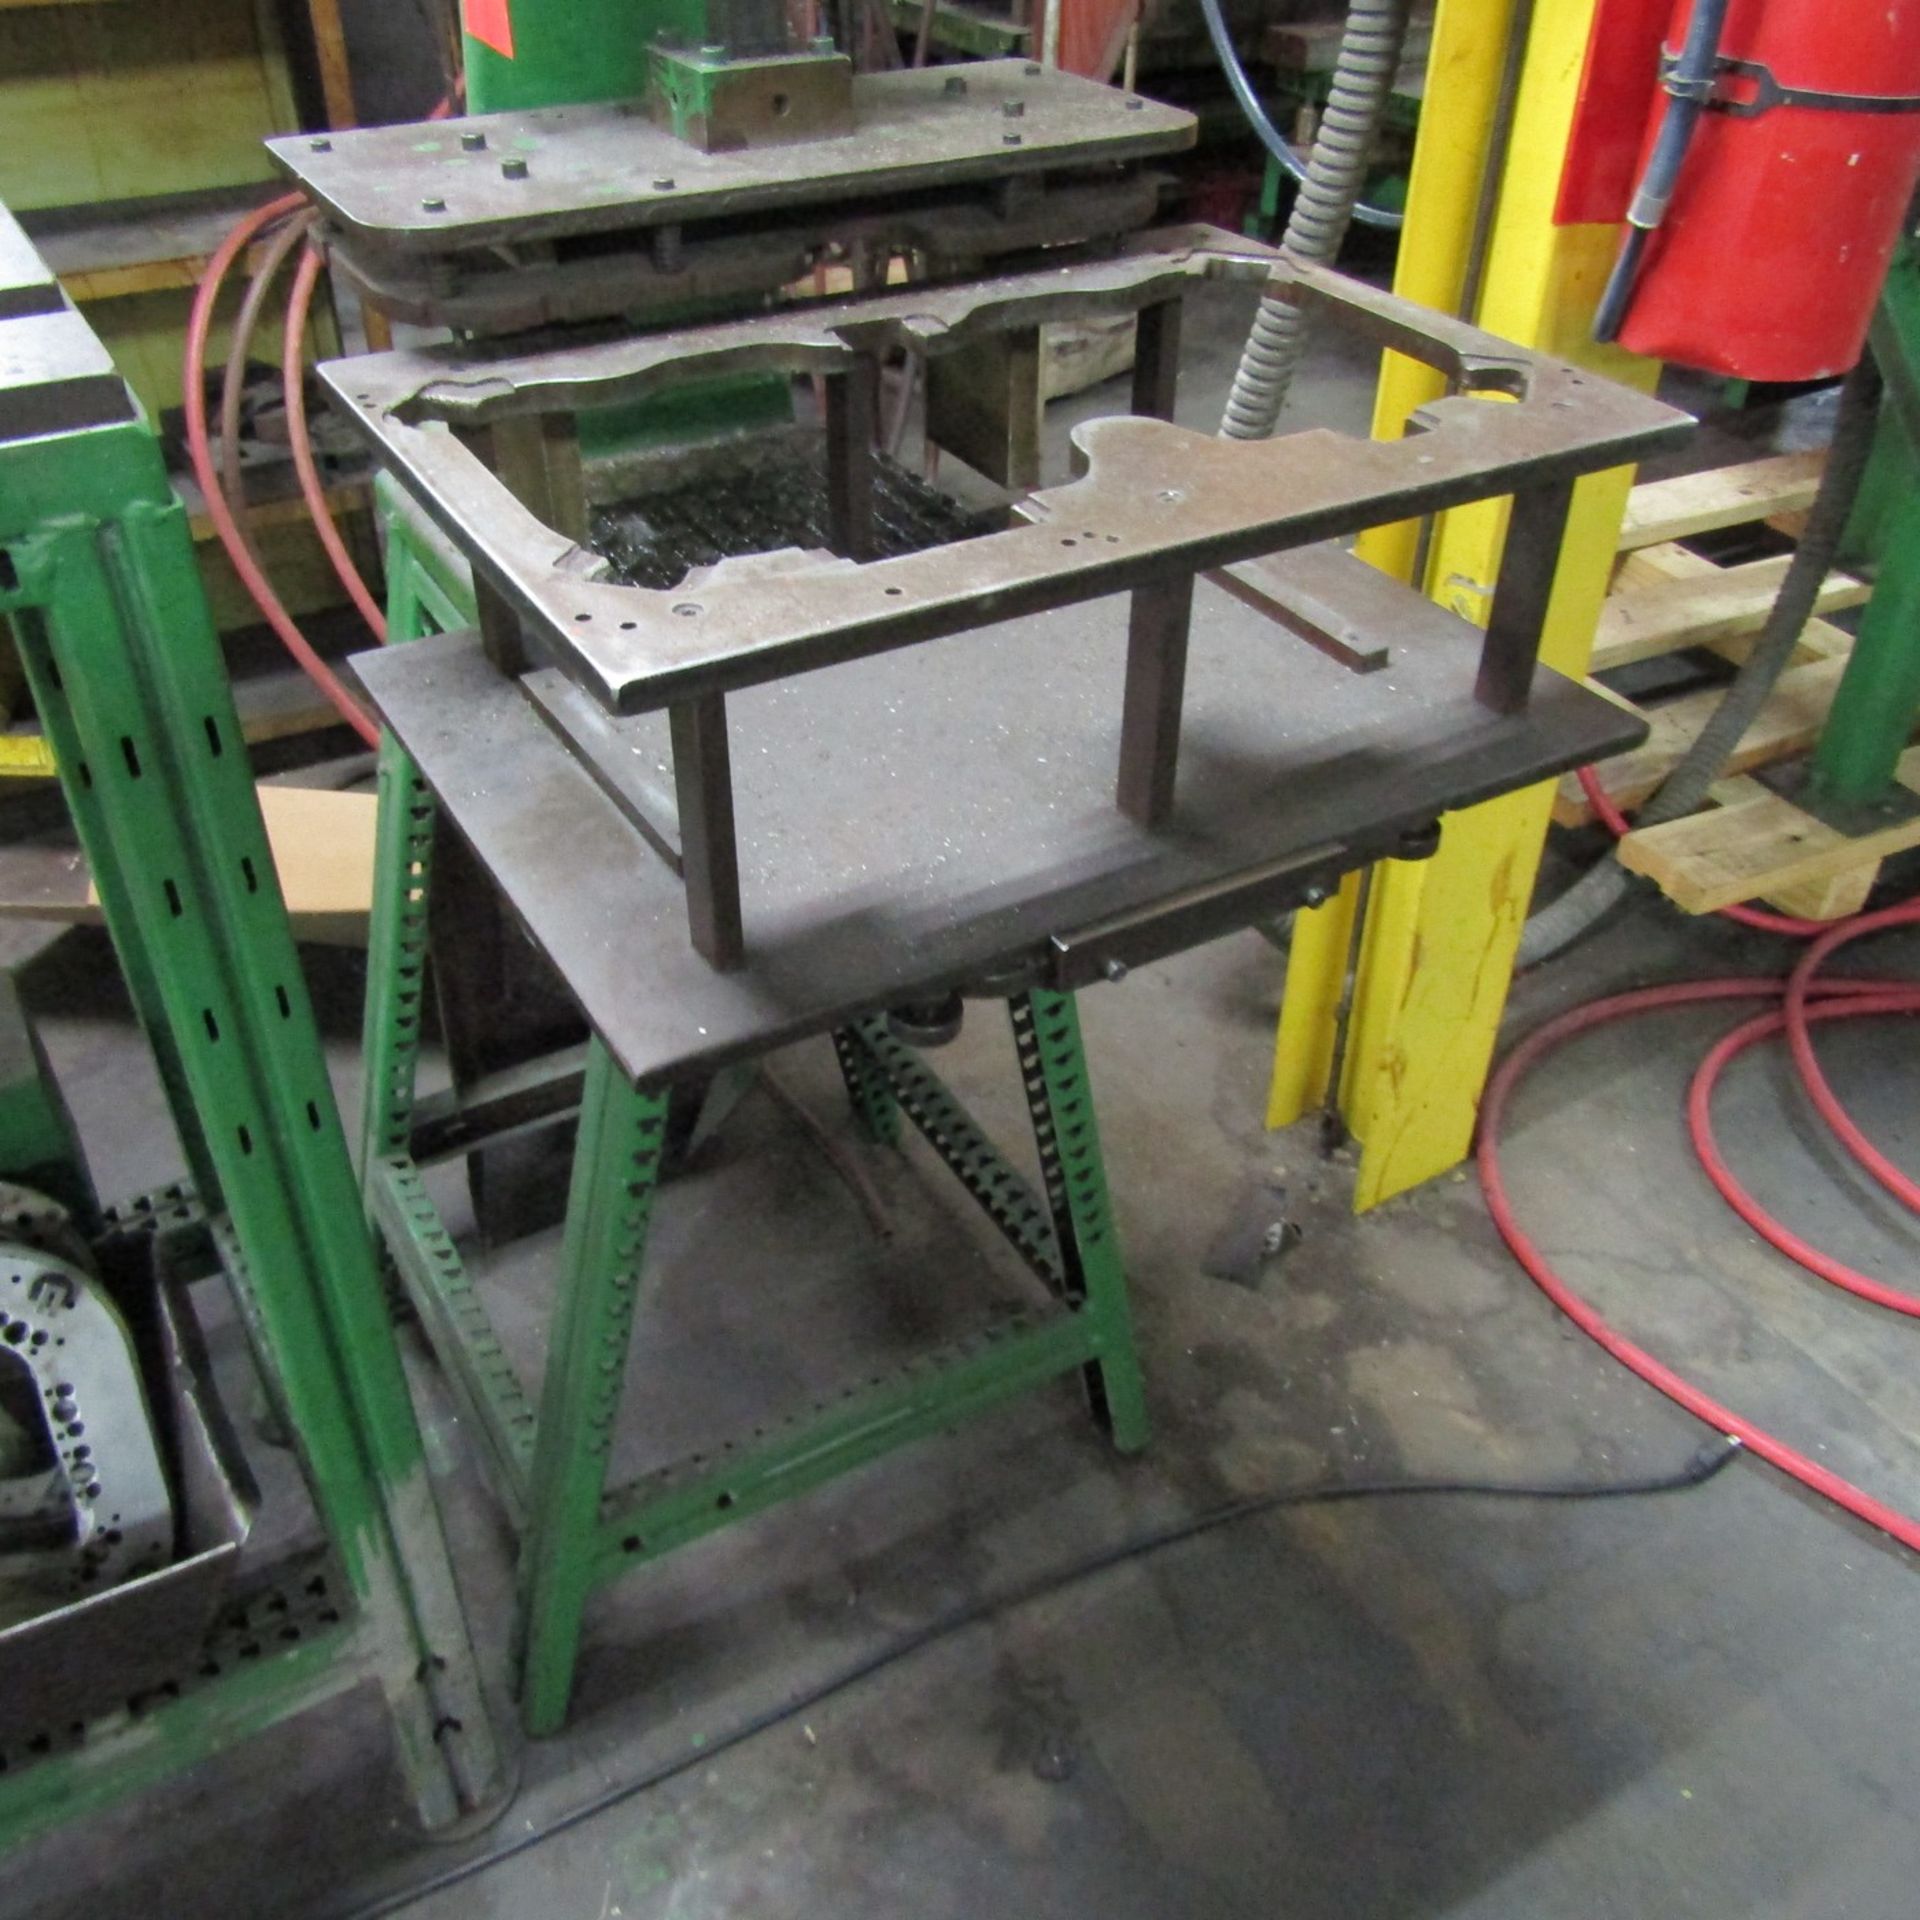 Dake No. 1-1/2 Bench Top Arbor Press; with Stand - Image 3 of 3